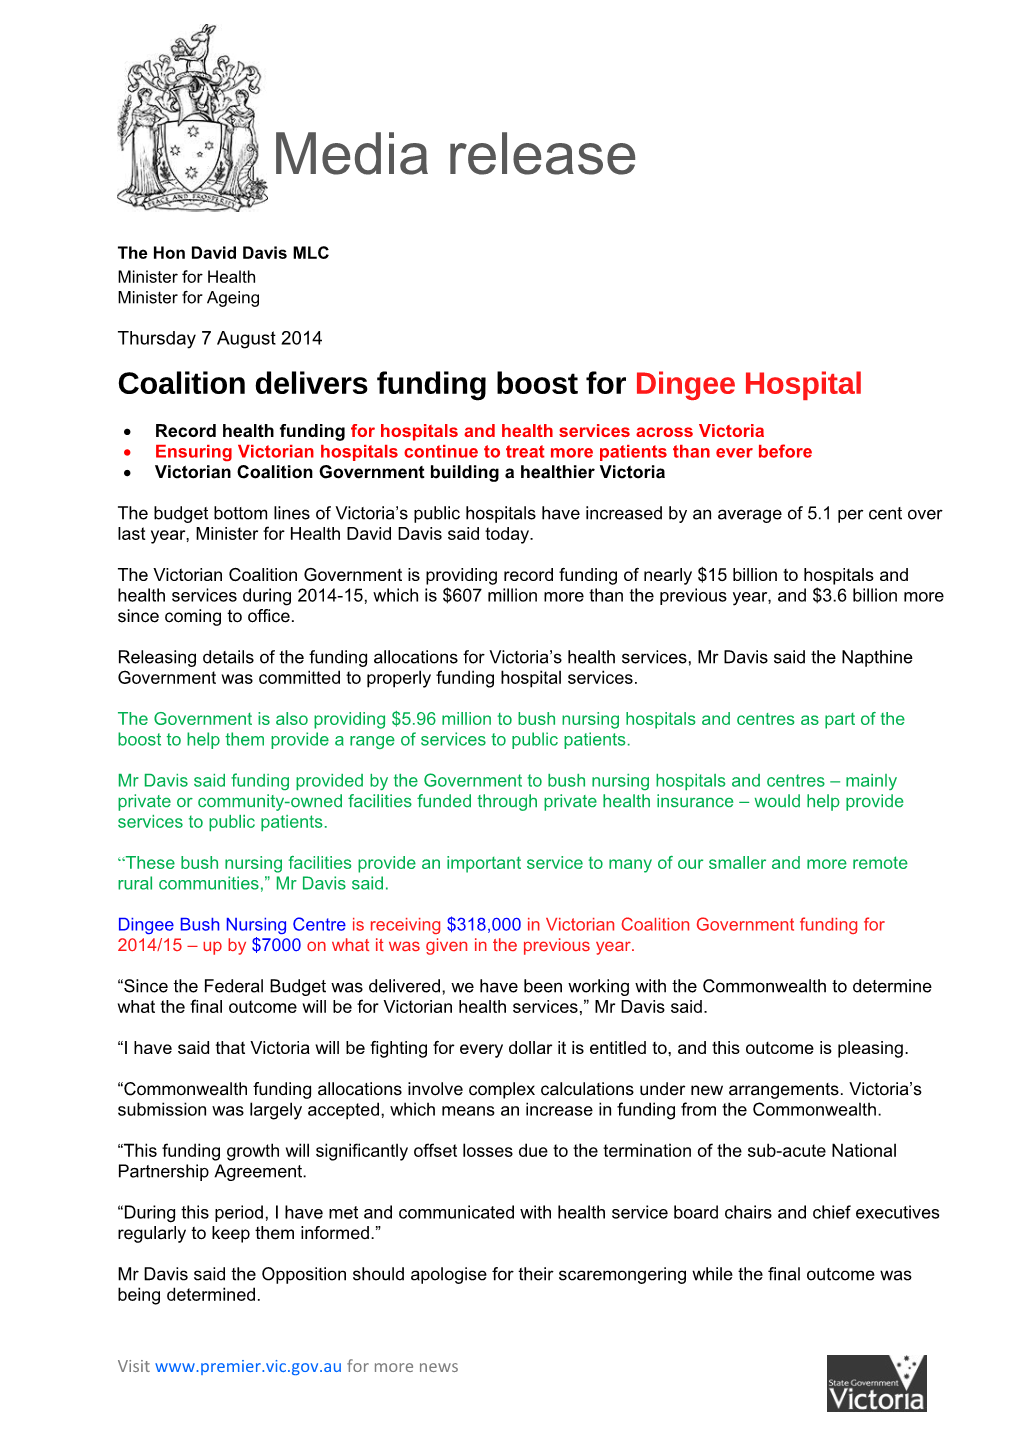 Coalition Delivers Funding Boost for Dingee Hospital